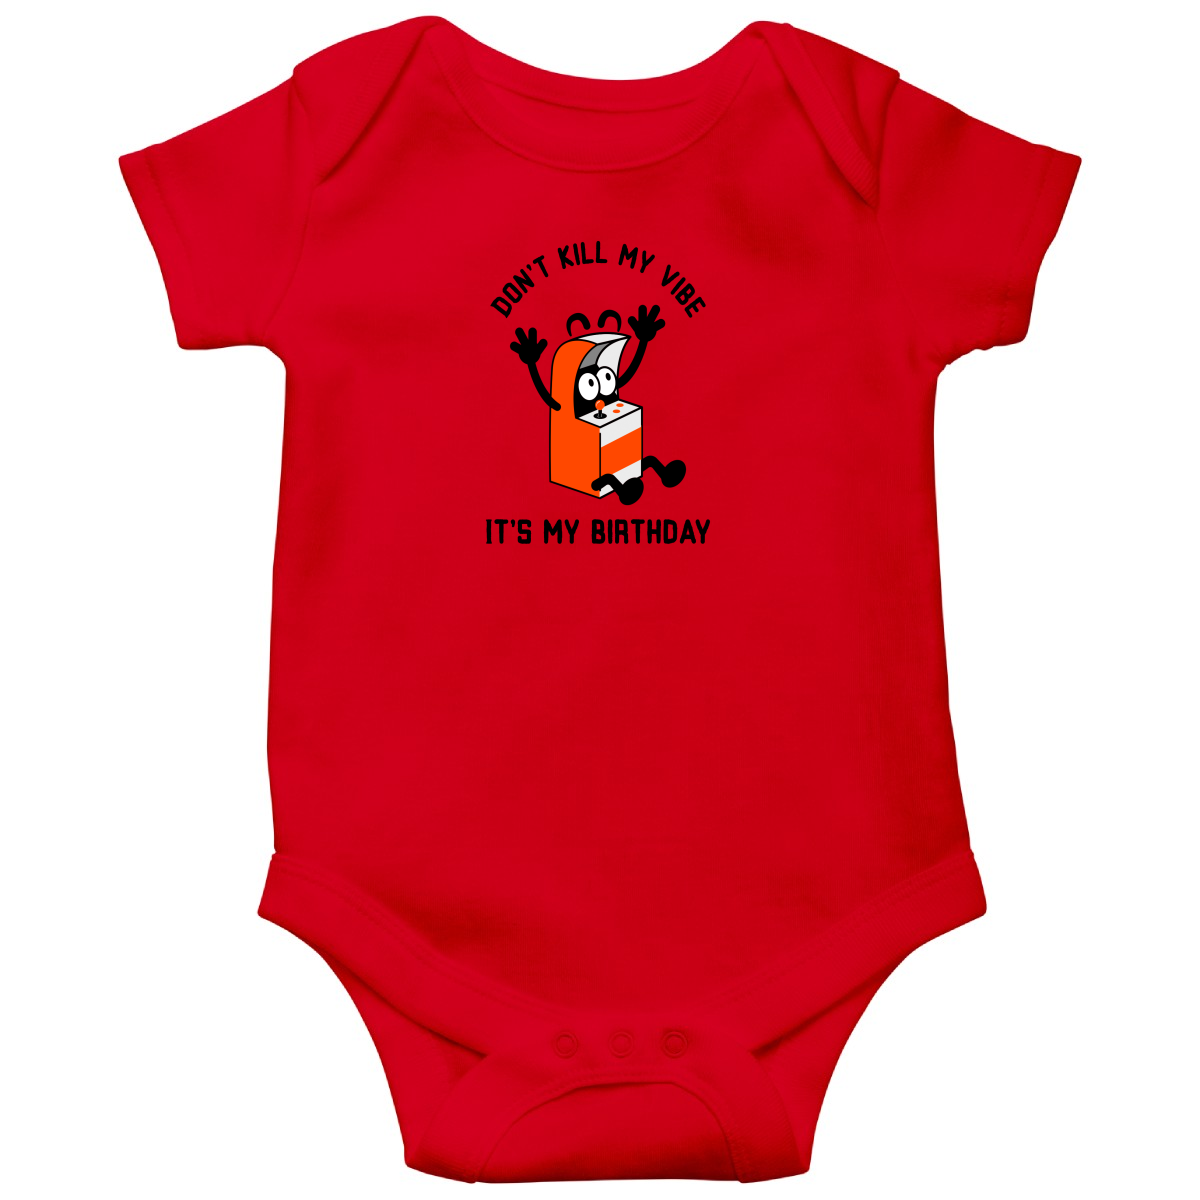 Don't Kill my Vibe It is my Birthday Baby Bodysuits | Red